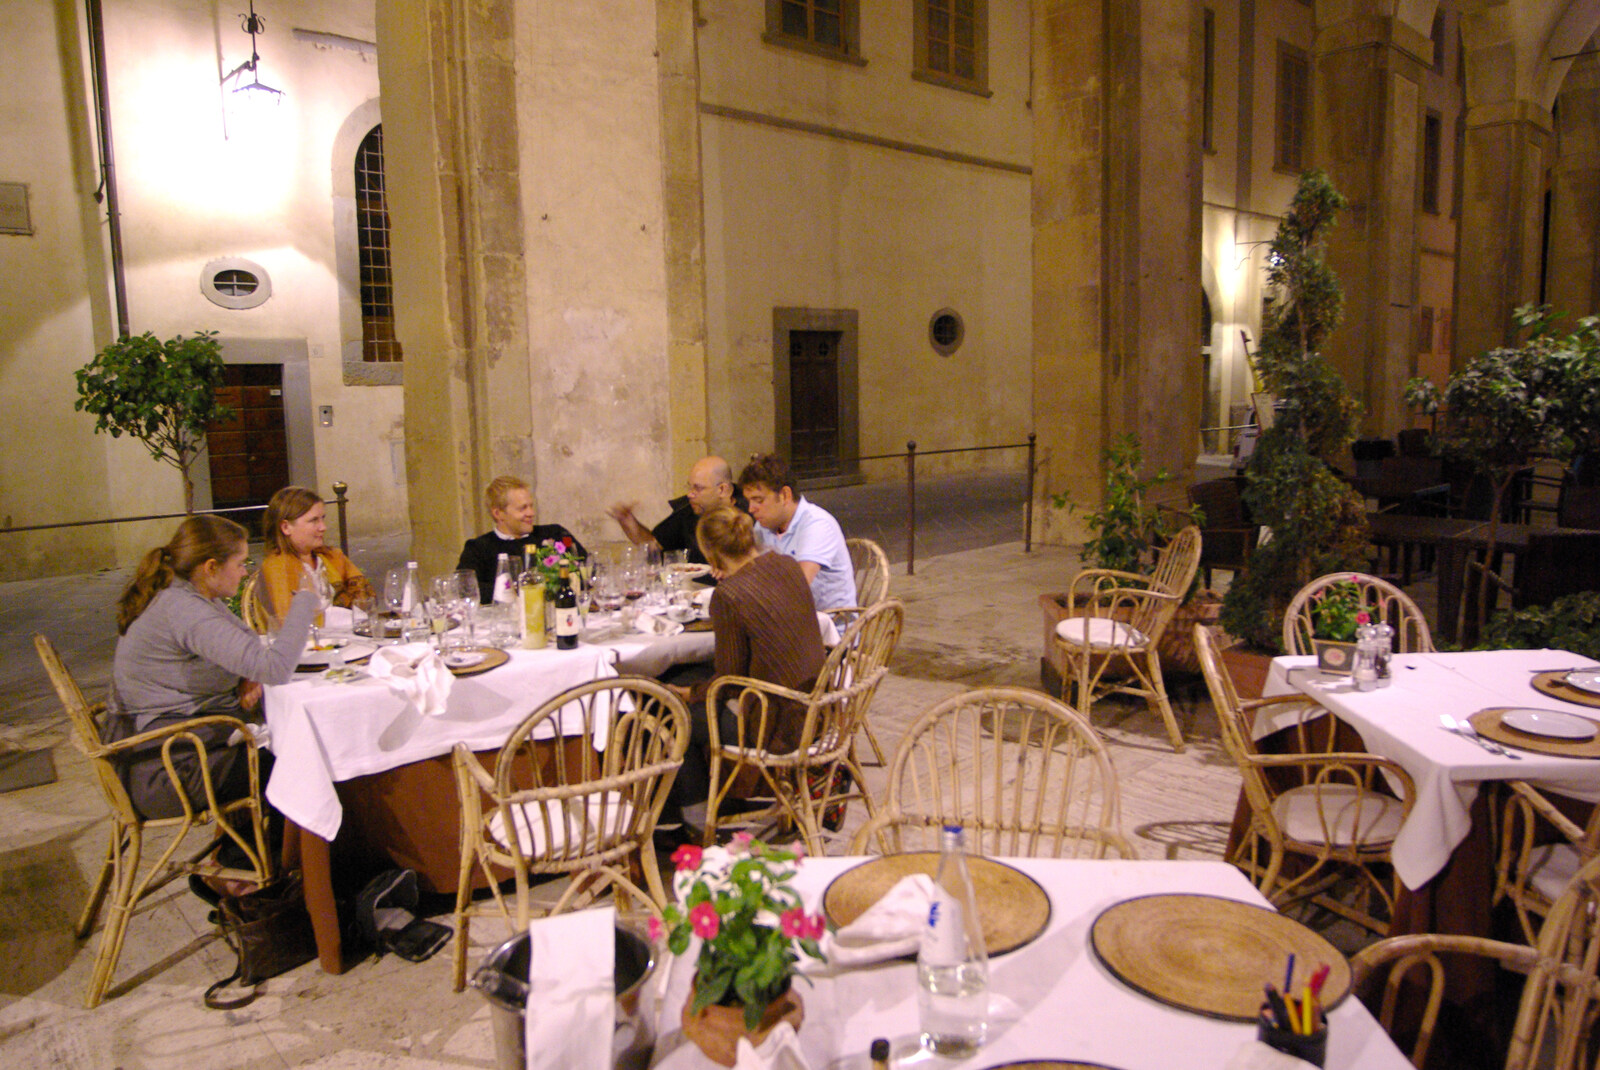 Tenuta Il Palazzo in Arezzo, Tuscany, Italy - 22nd July 2008: The group around the table